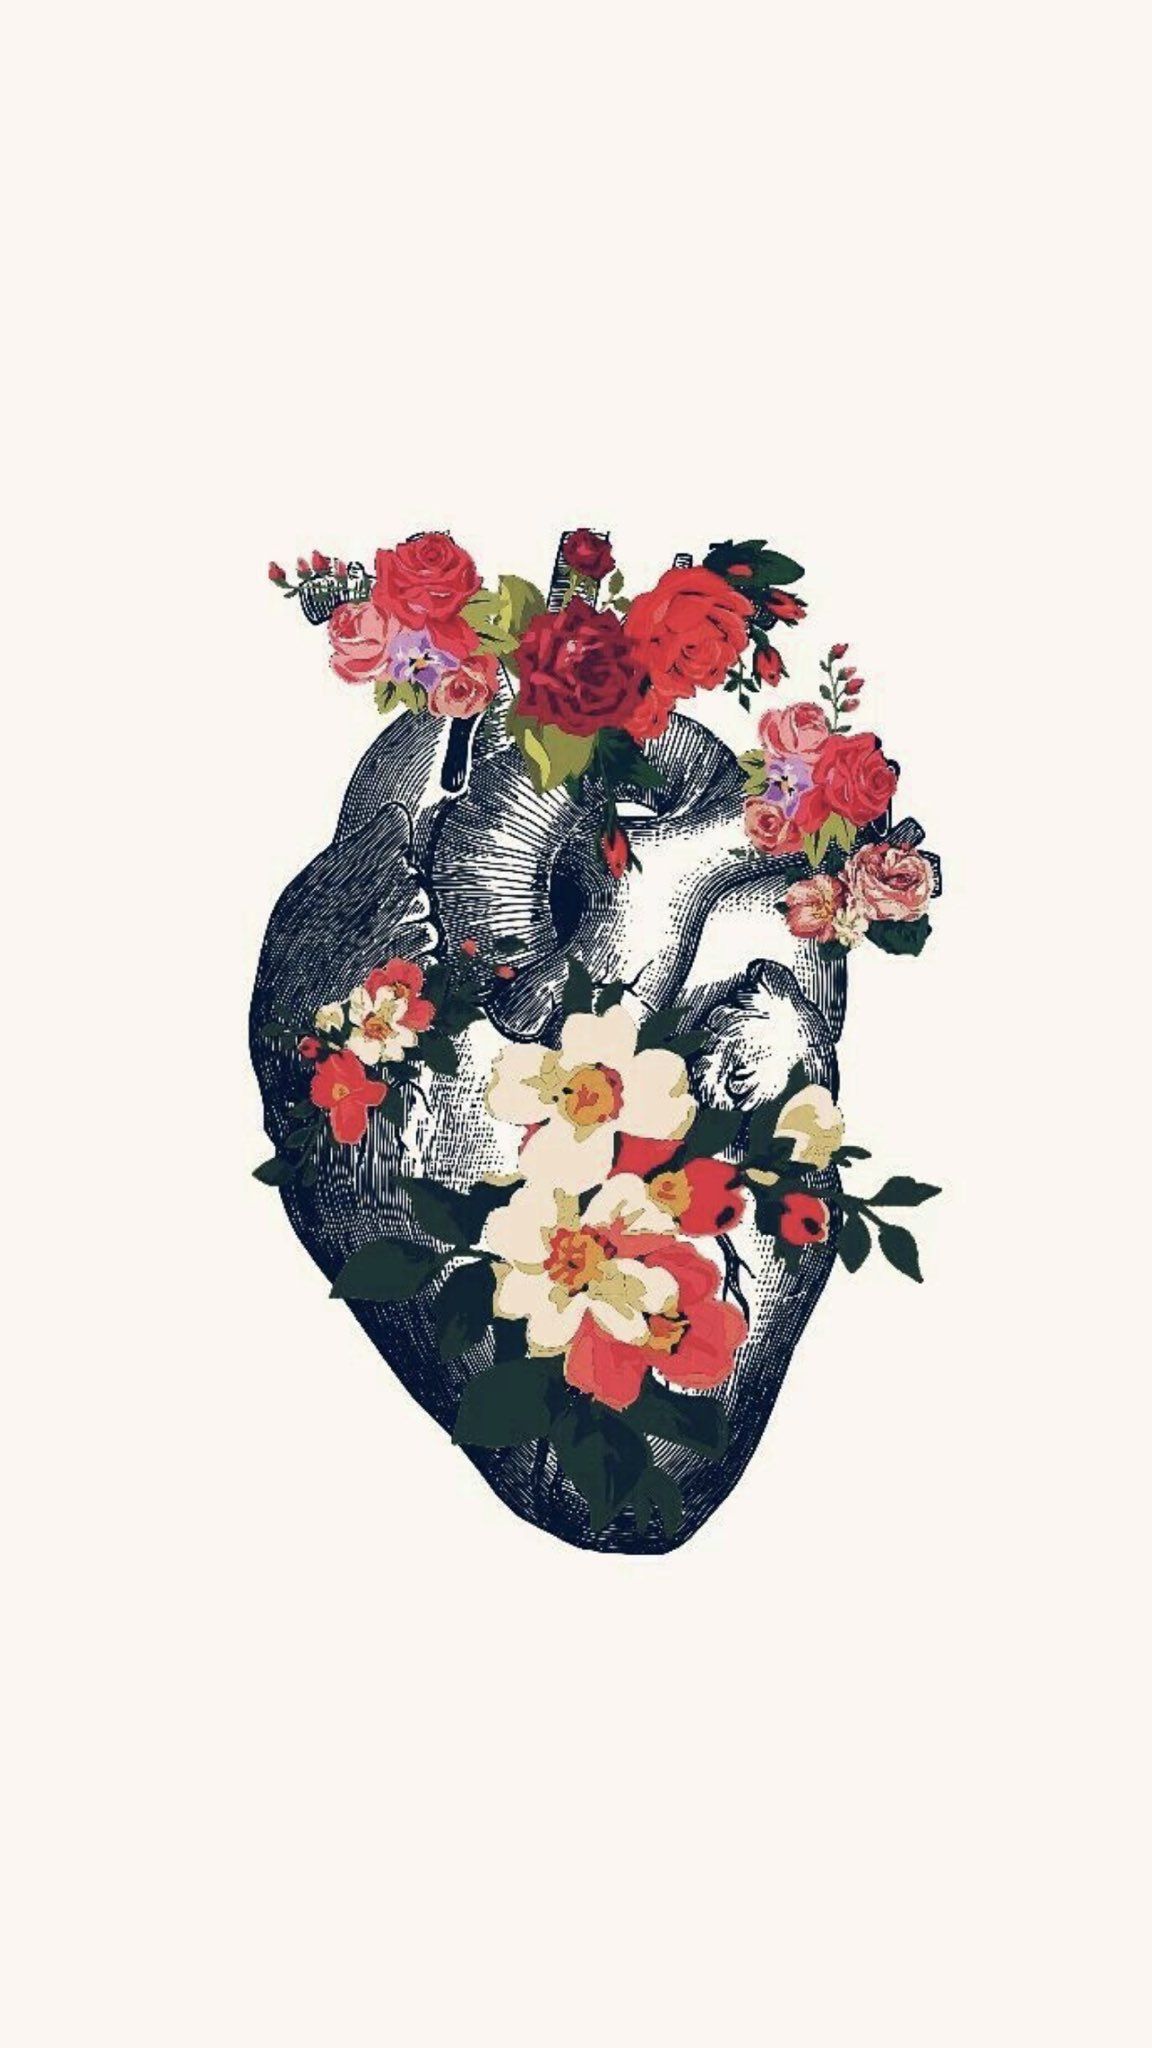 A heart made of flowers and leaves - Anatomy